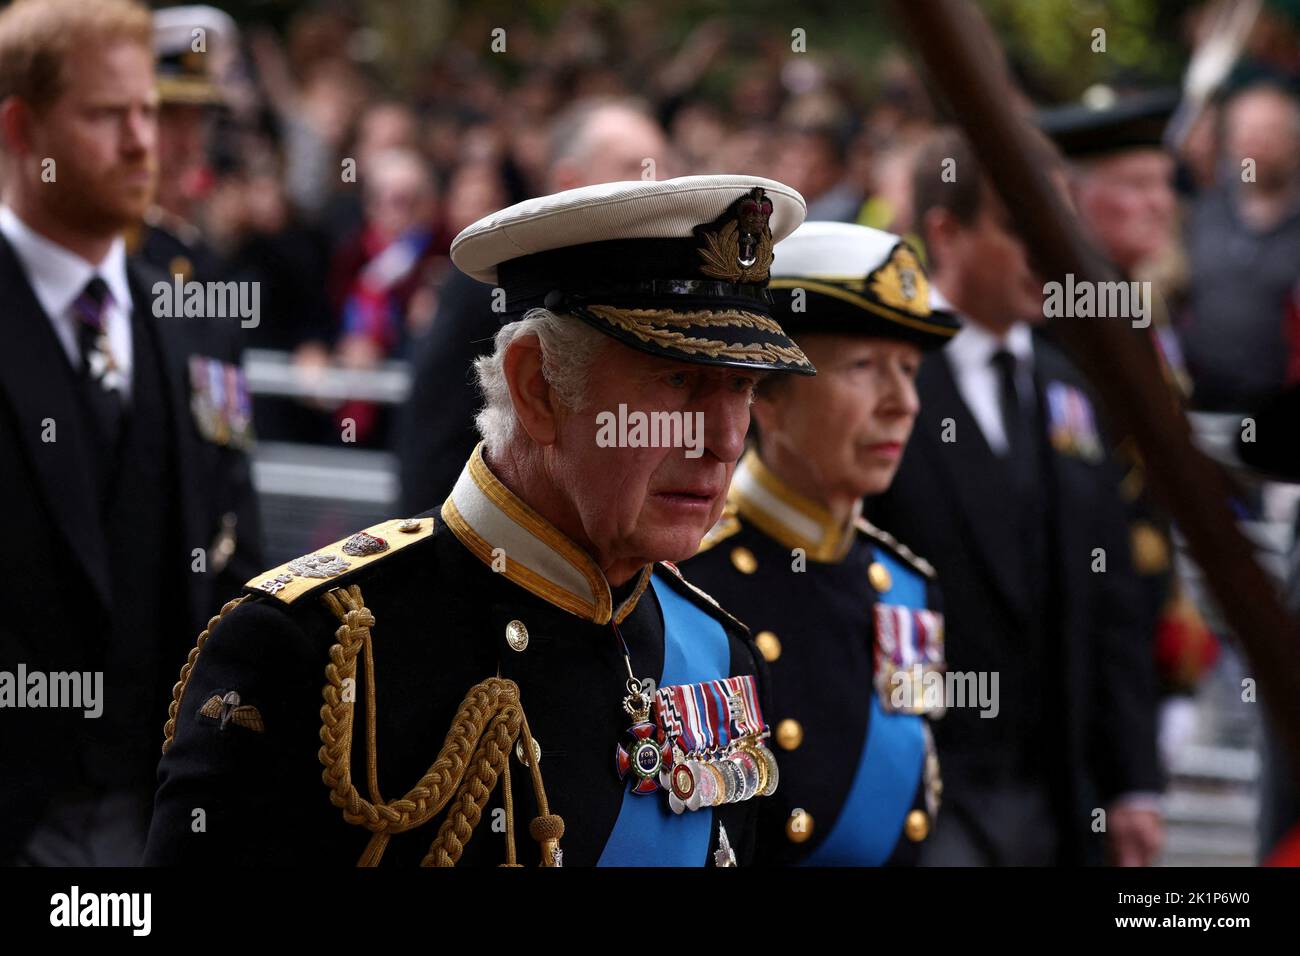 Britain's King Charles and Britain's Anne, Princess Royal attend the state funeral and burial of Britain's Queen Elizabeth, in London, Britain, September 19, 2022. REUTERS/Tom Nicholson Stock Photo